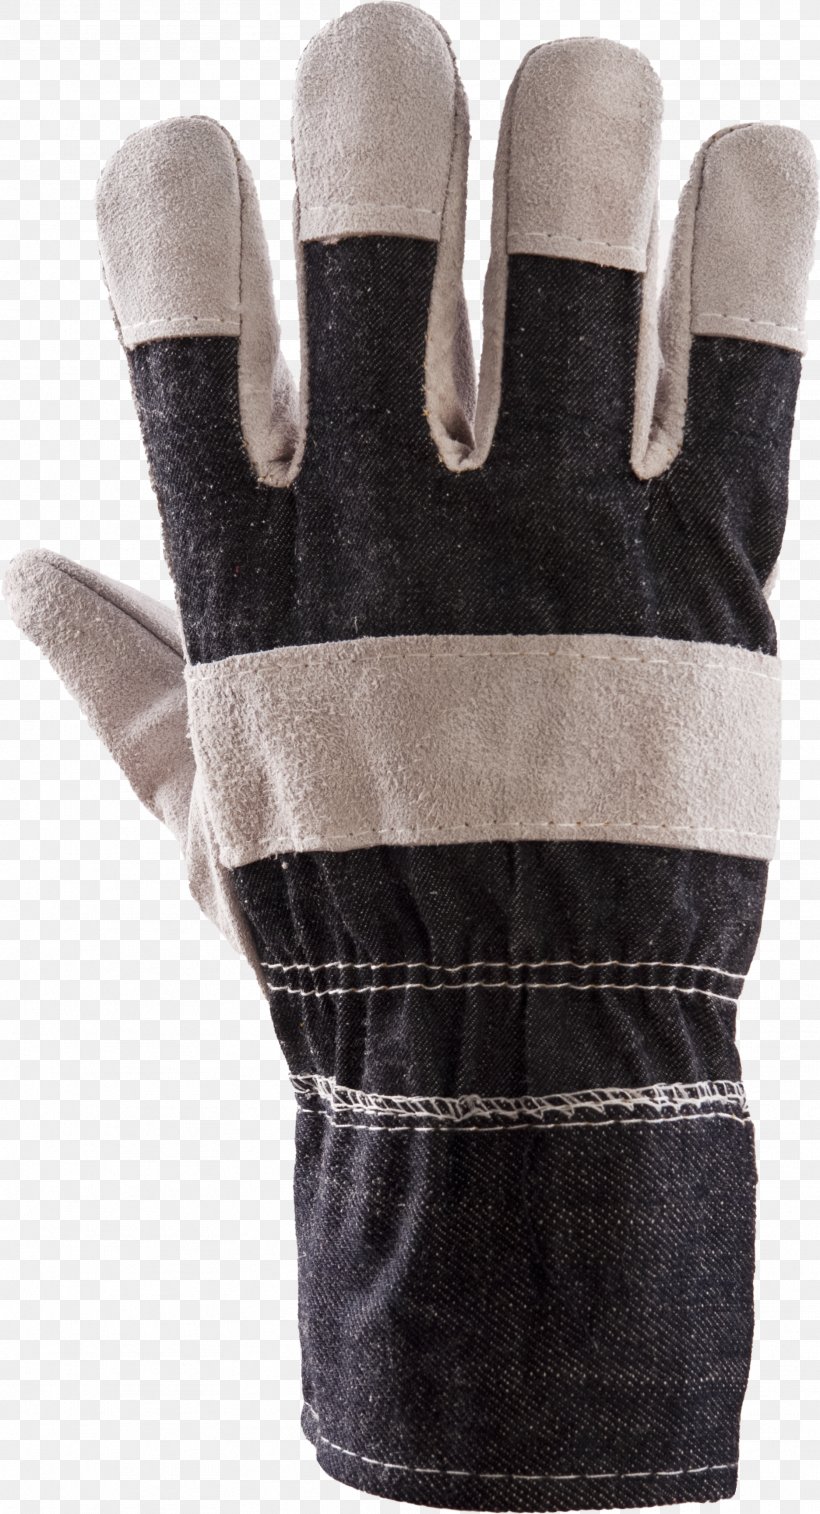 H&M Glove, PNG, 1873x3459px, Glove, Bicycle Glove, Hand, Safety, Safety Glove Download Free